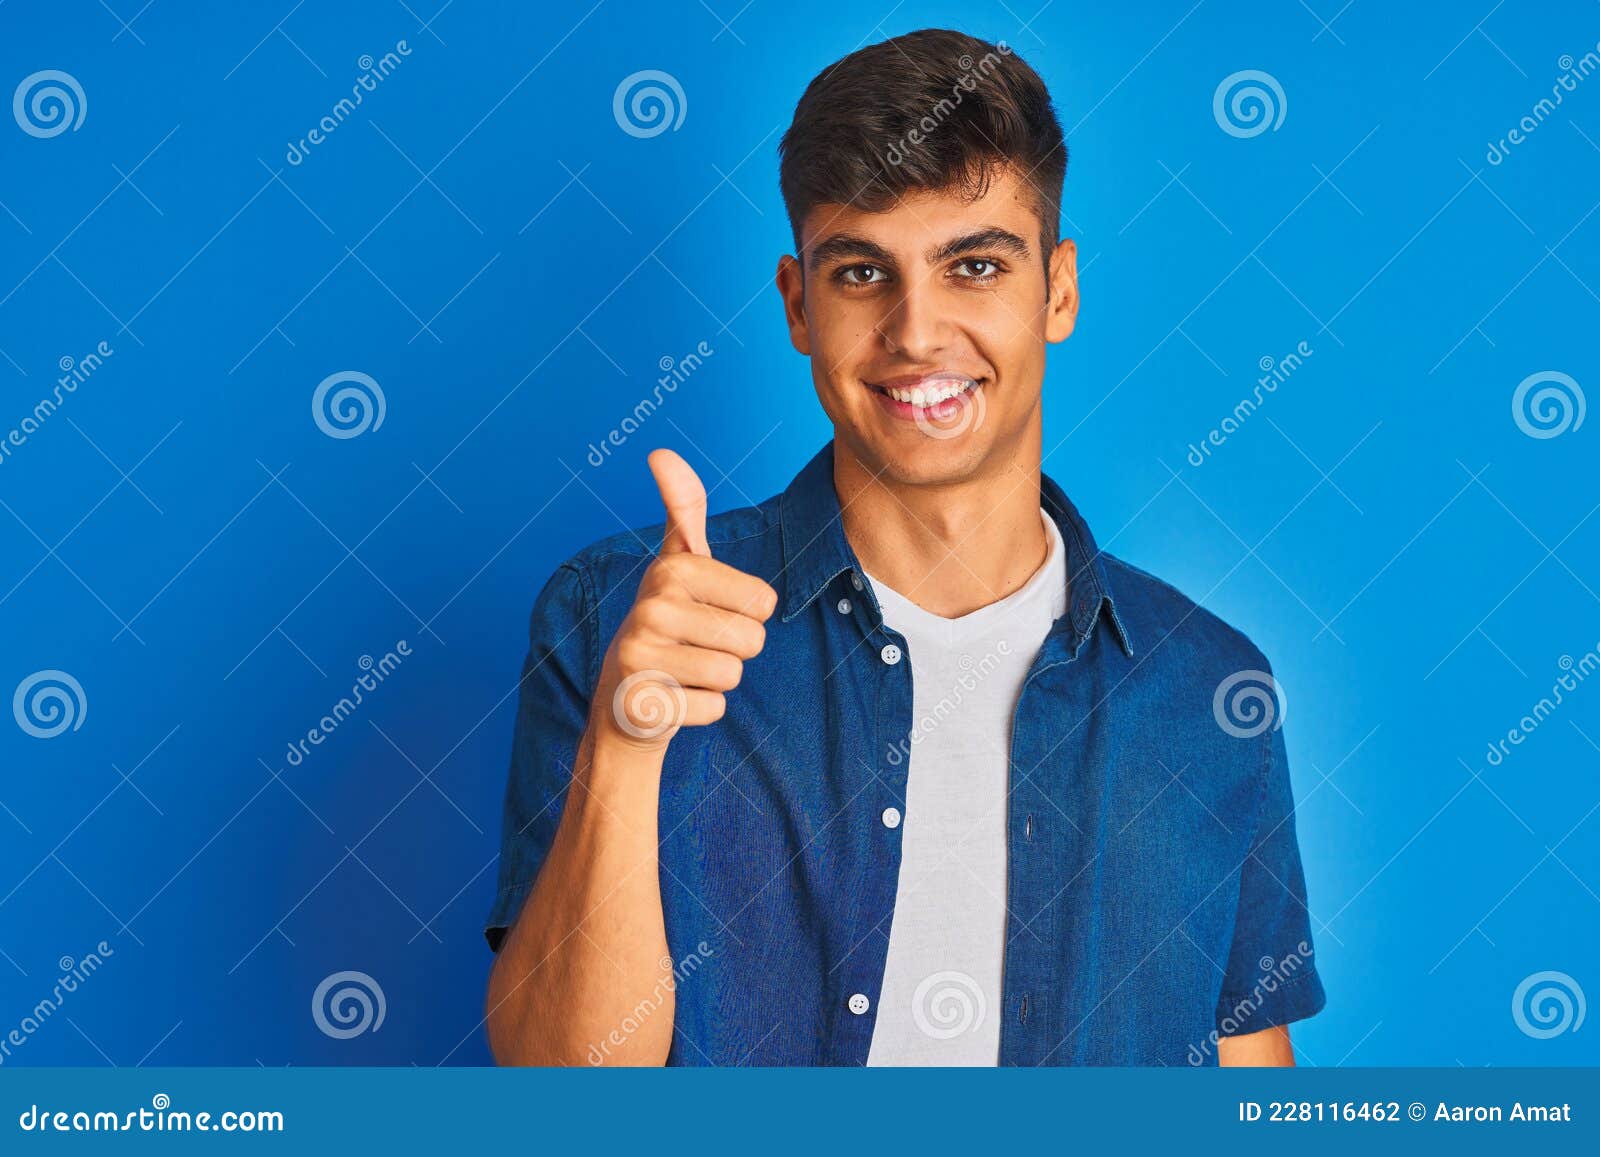 Young Indian Man Wearing Shirt Standing Over Isolated Blue Background ...